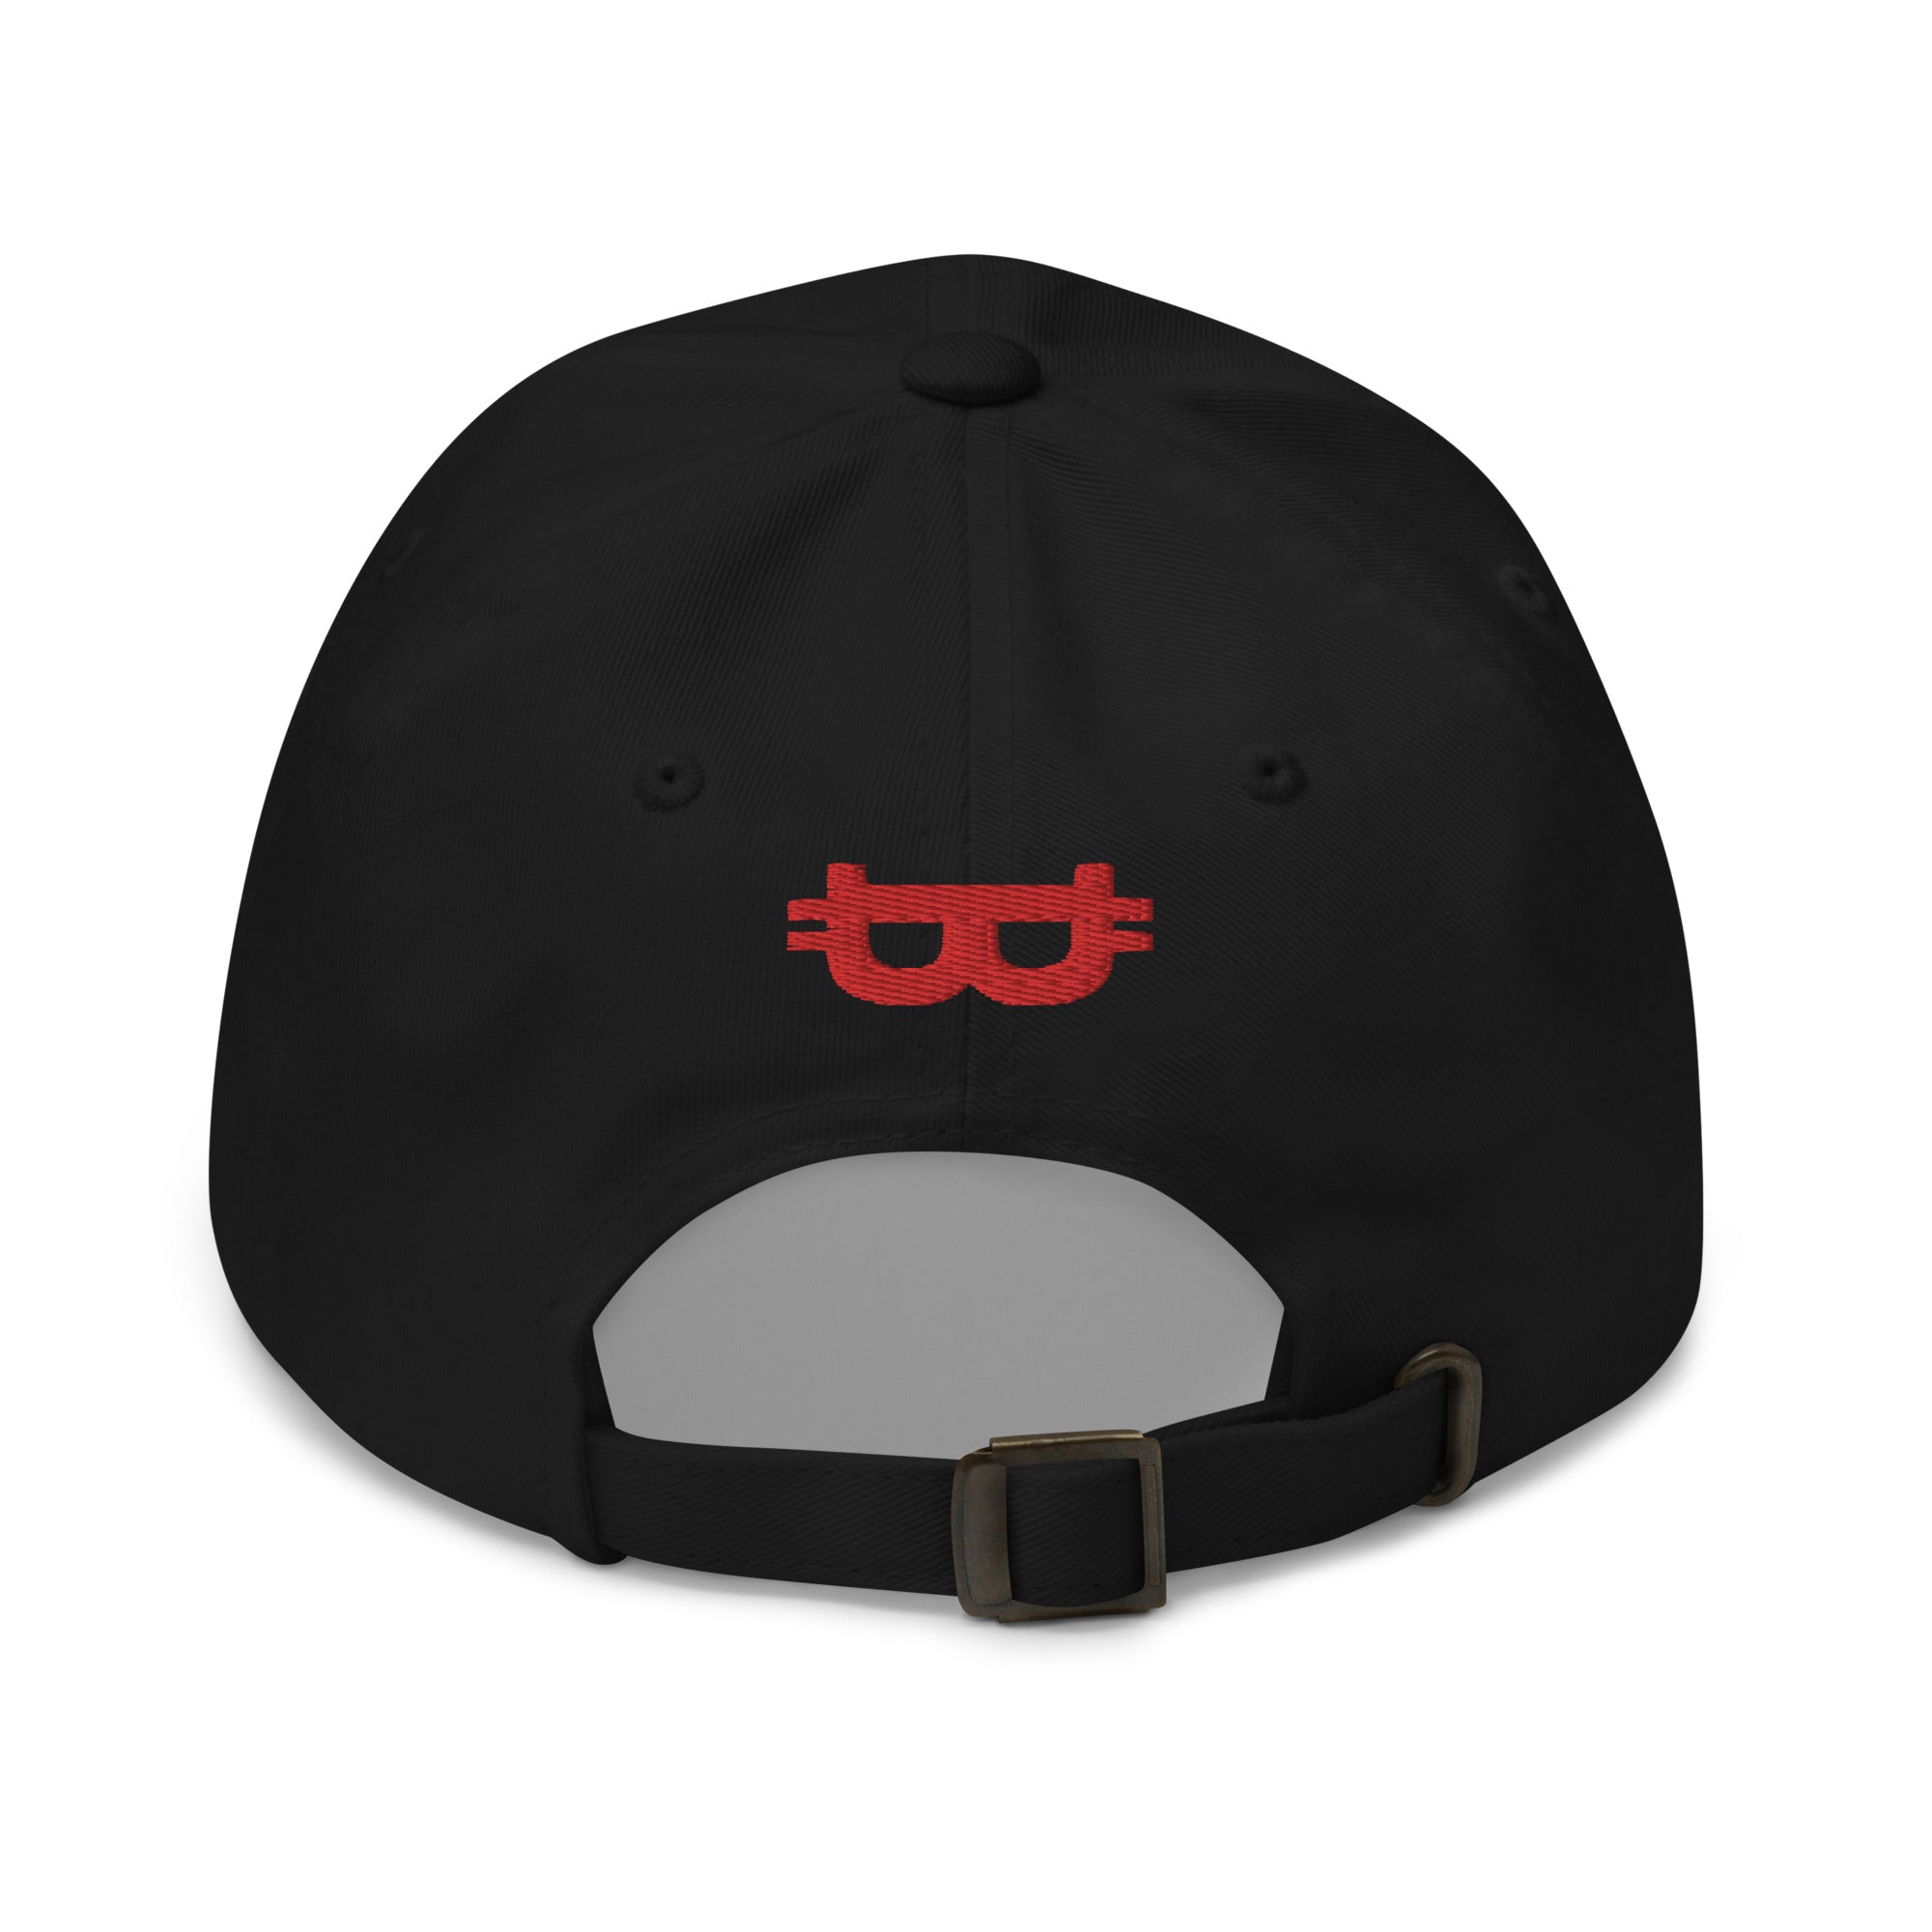 Bitcoin Merch - The Satoshi Hat (Red Logo) features embroidered designs on the front and back of a black cap. Back view. 